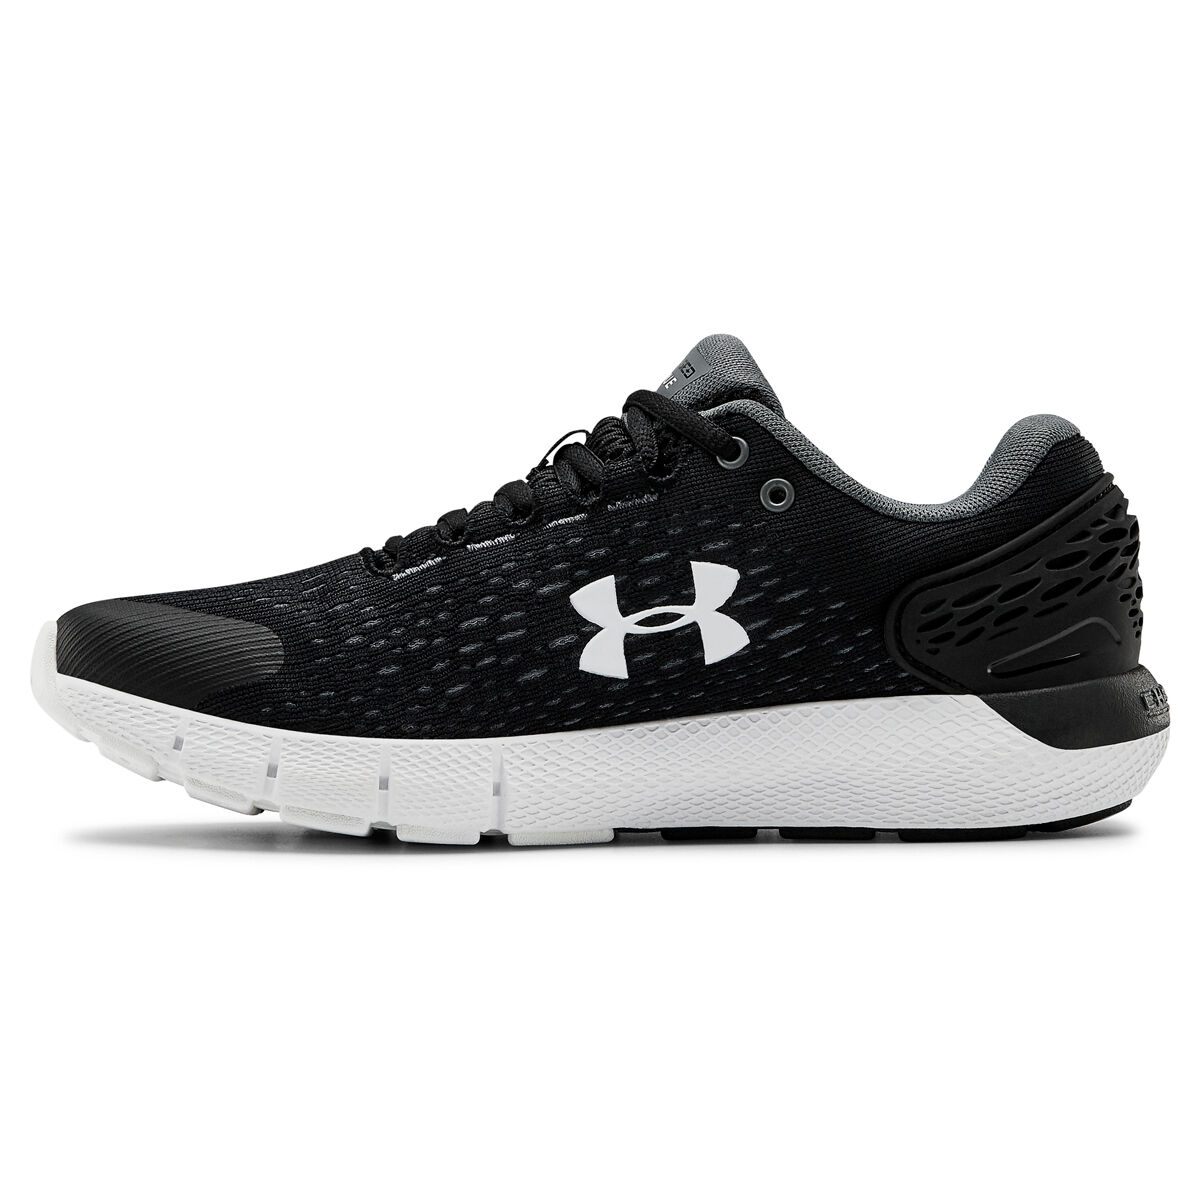 under armour charged rogue black